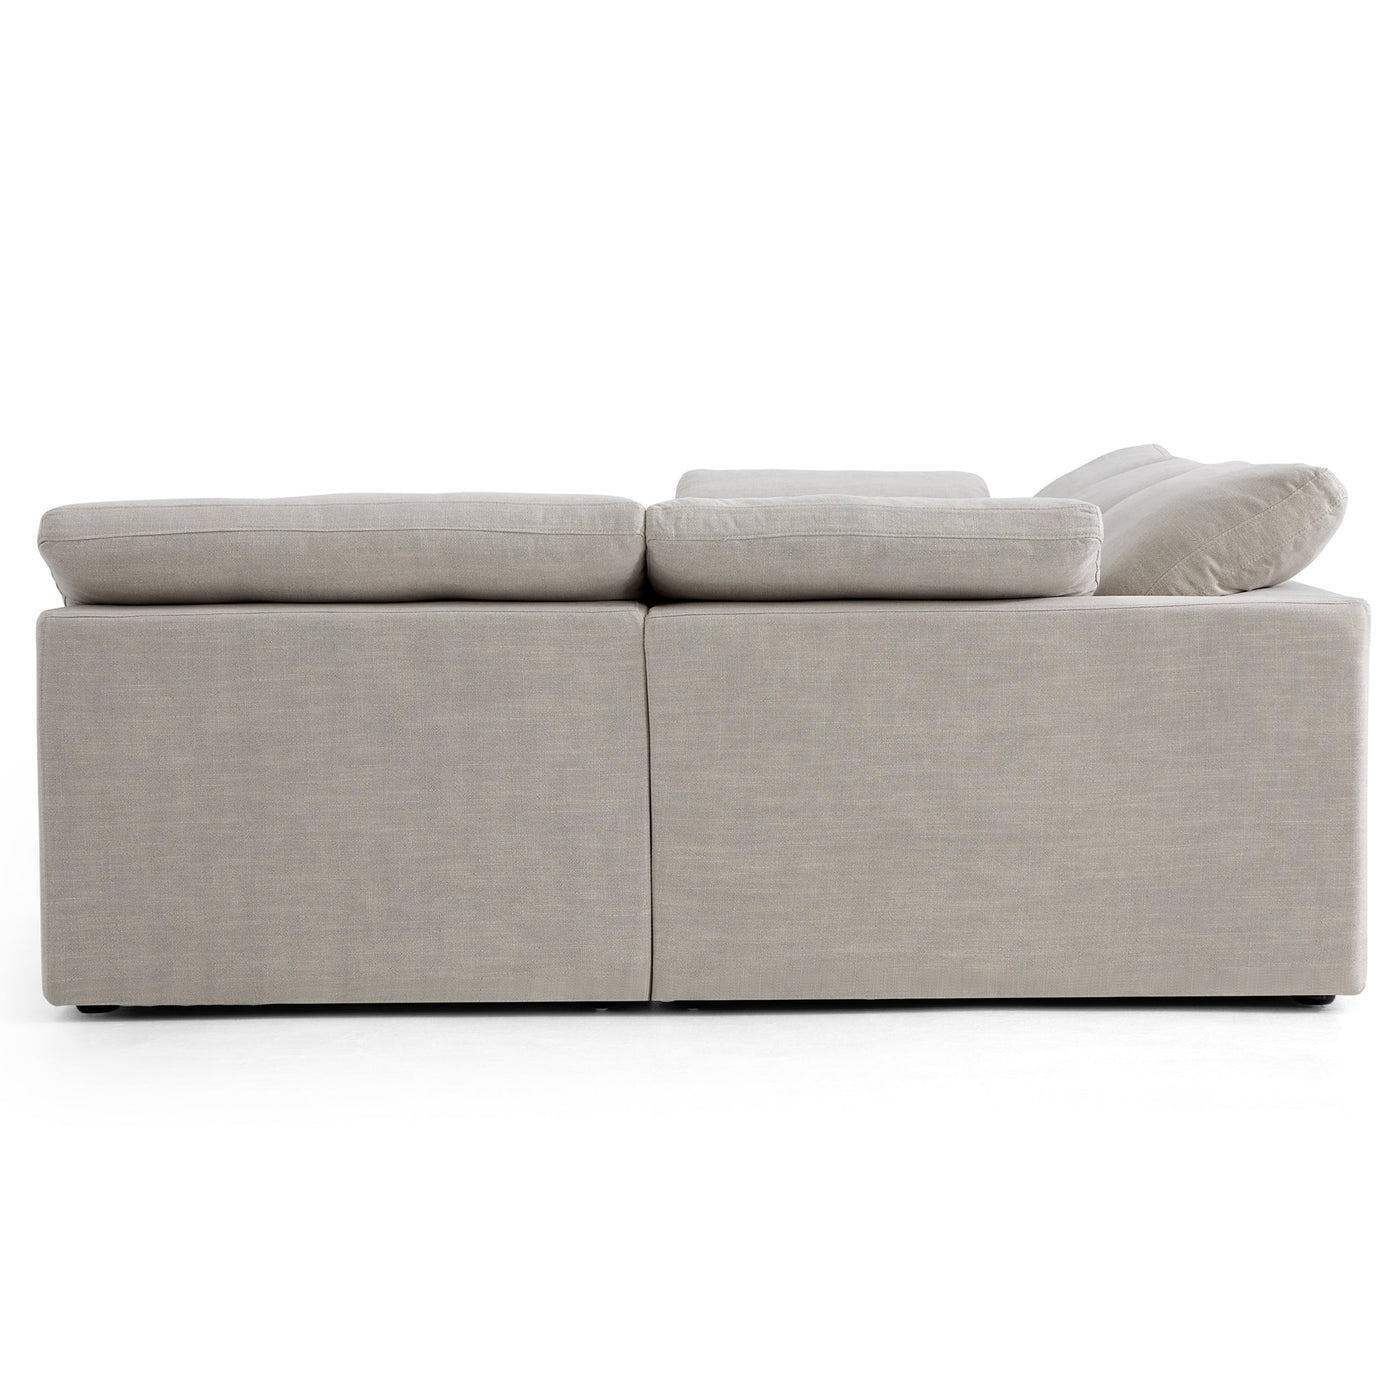 Tender Wabi Sabi Sand U Shaped Sectional with Open Ends-Sand